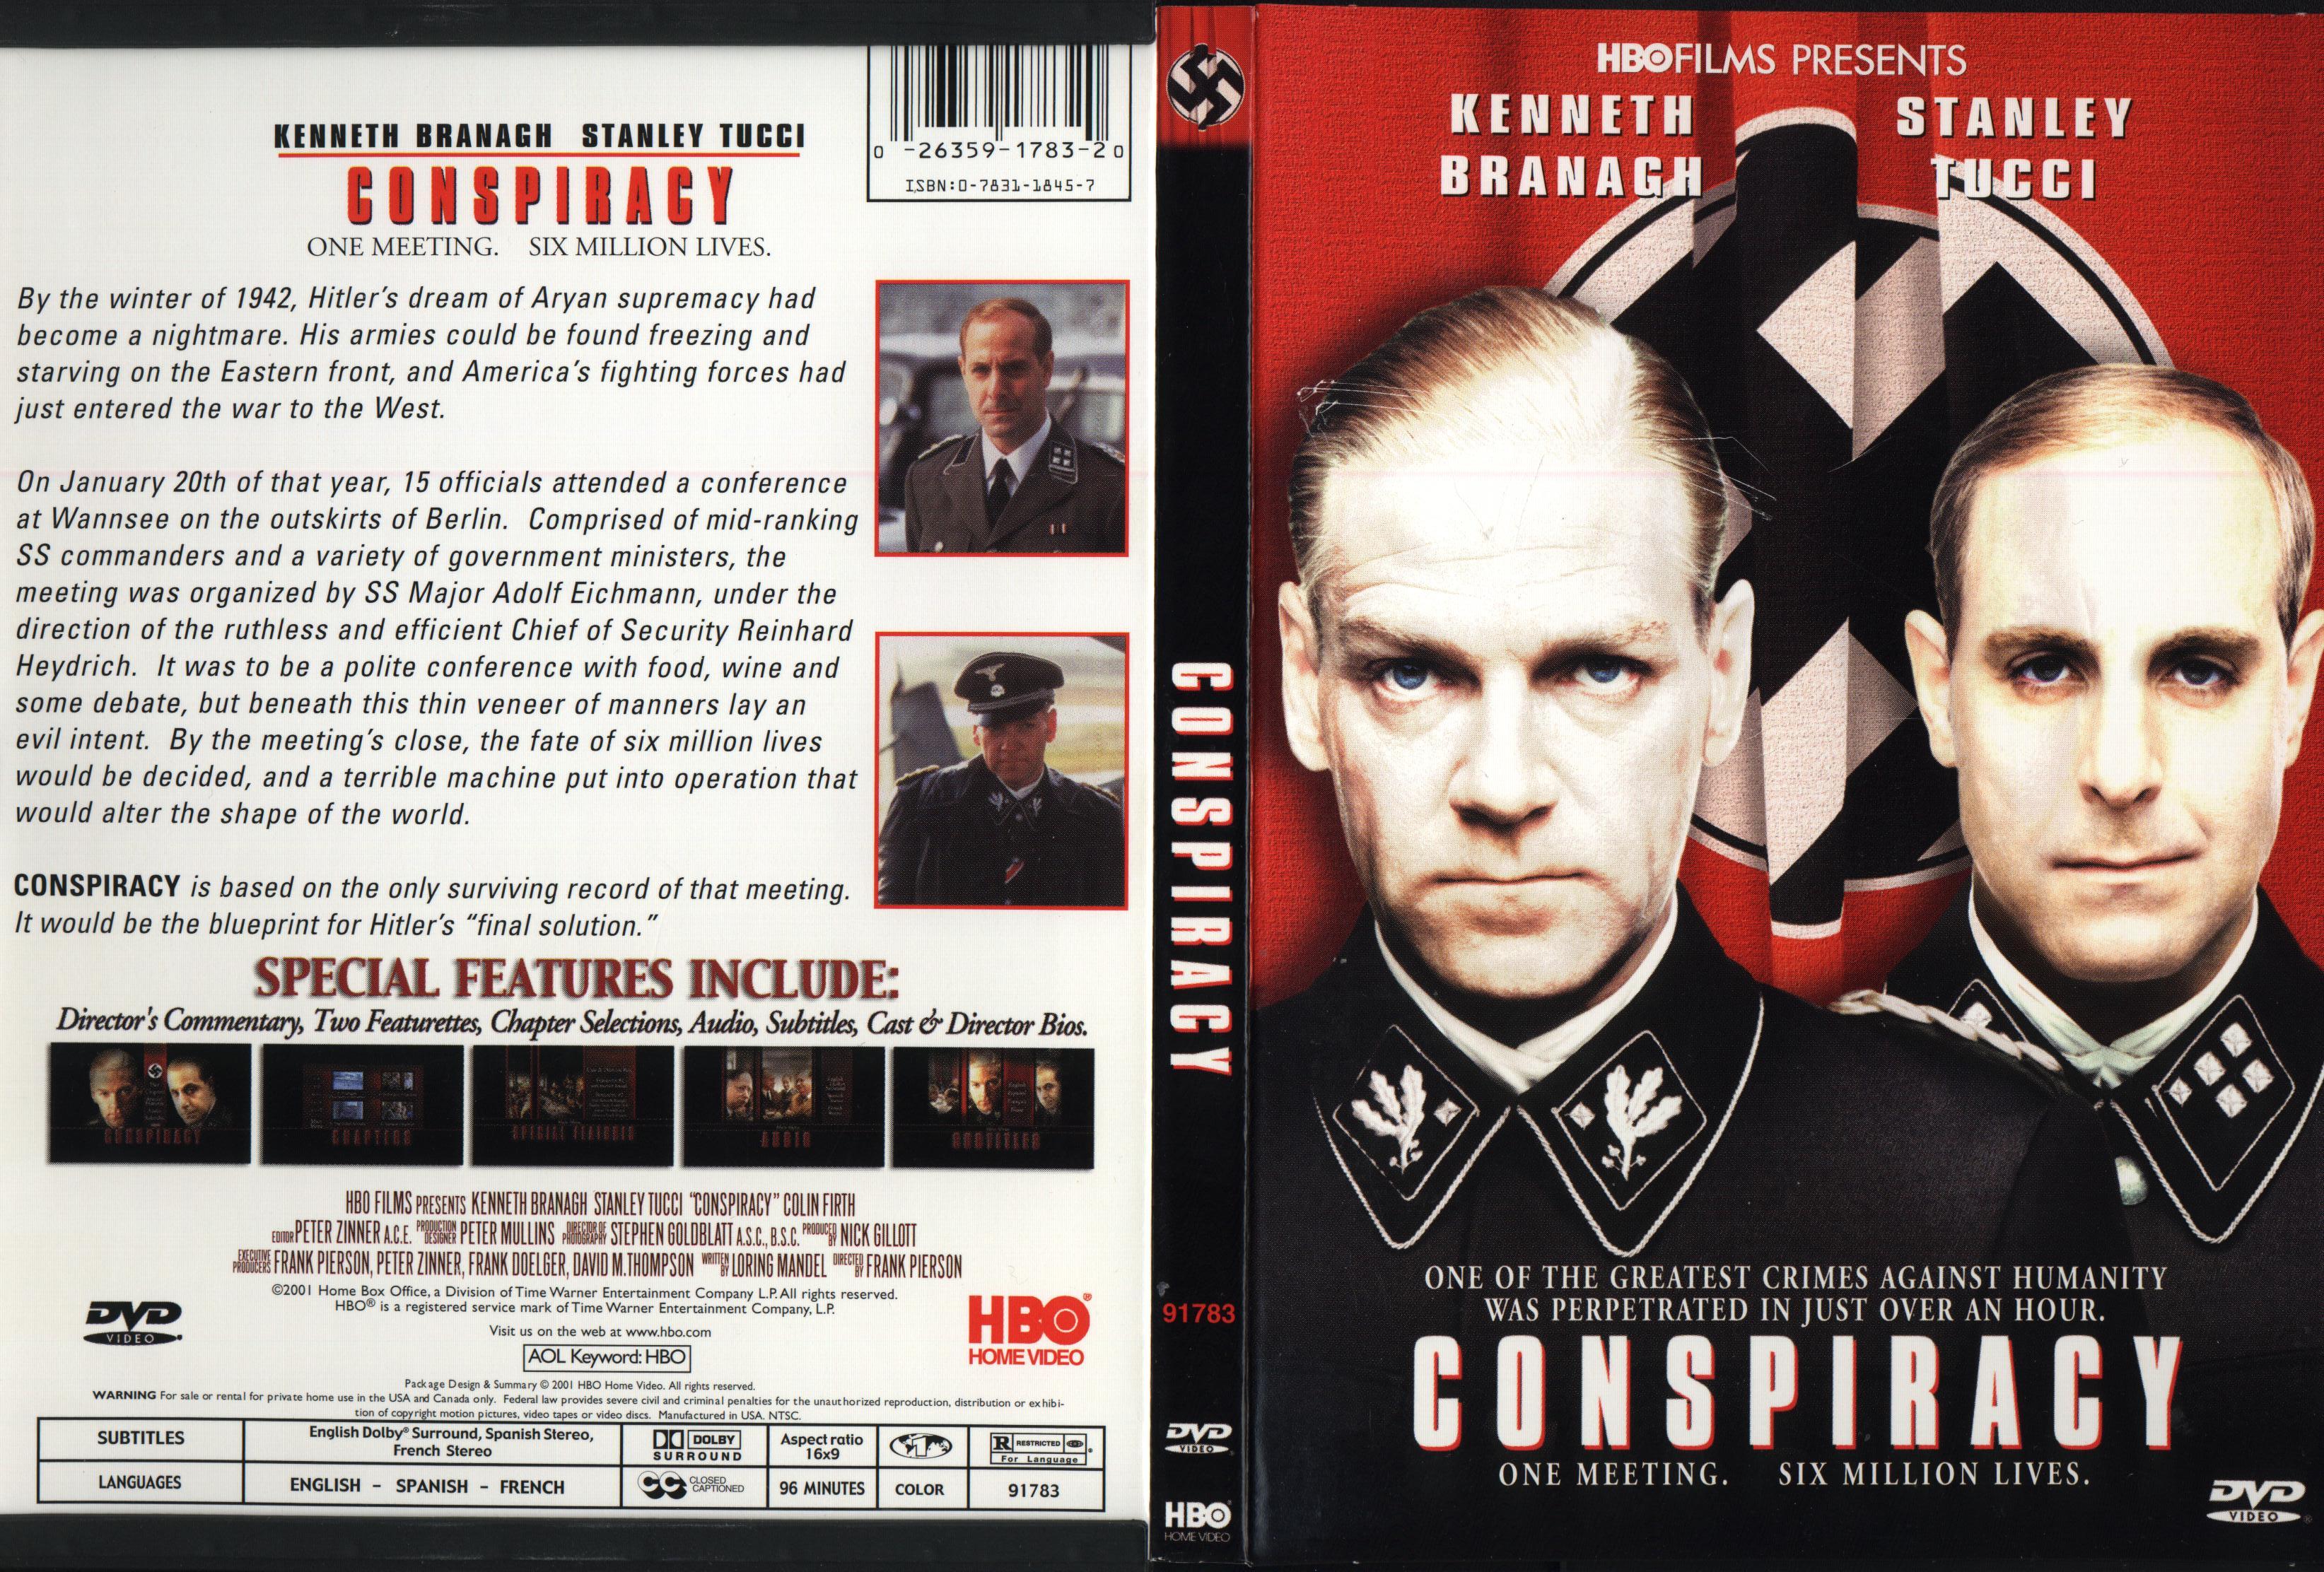 Jaquette DVD Conspiracy Zone 1